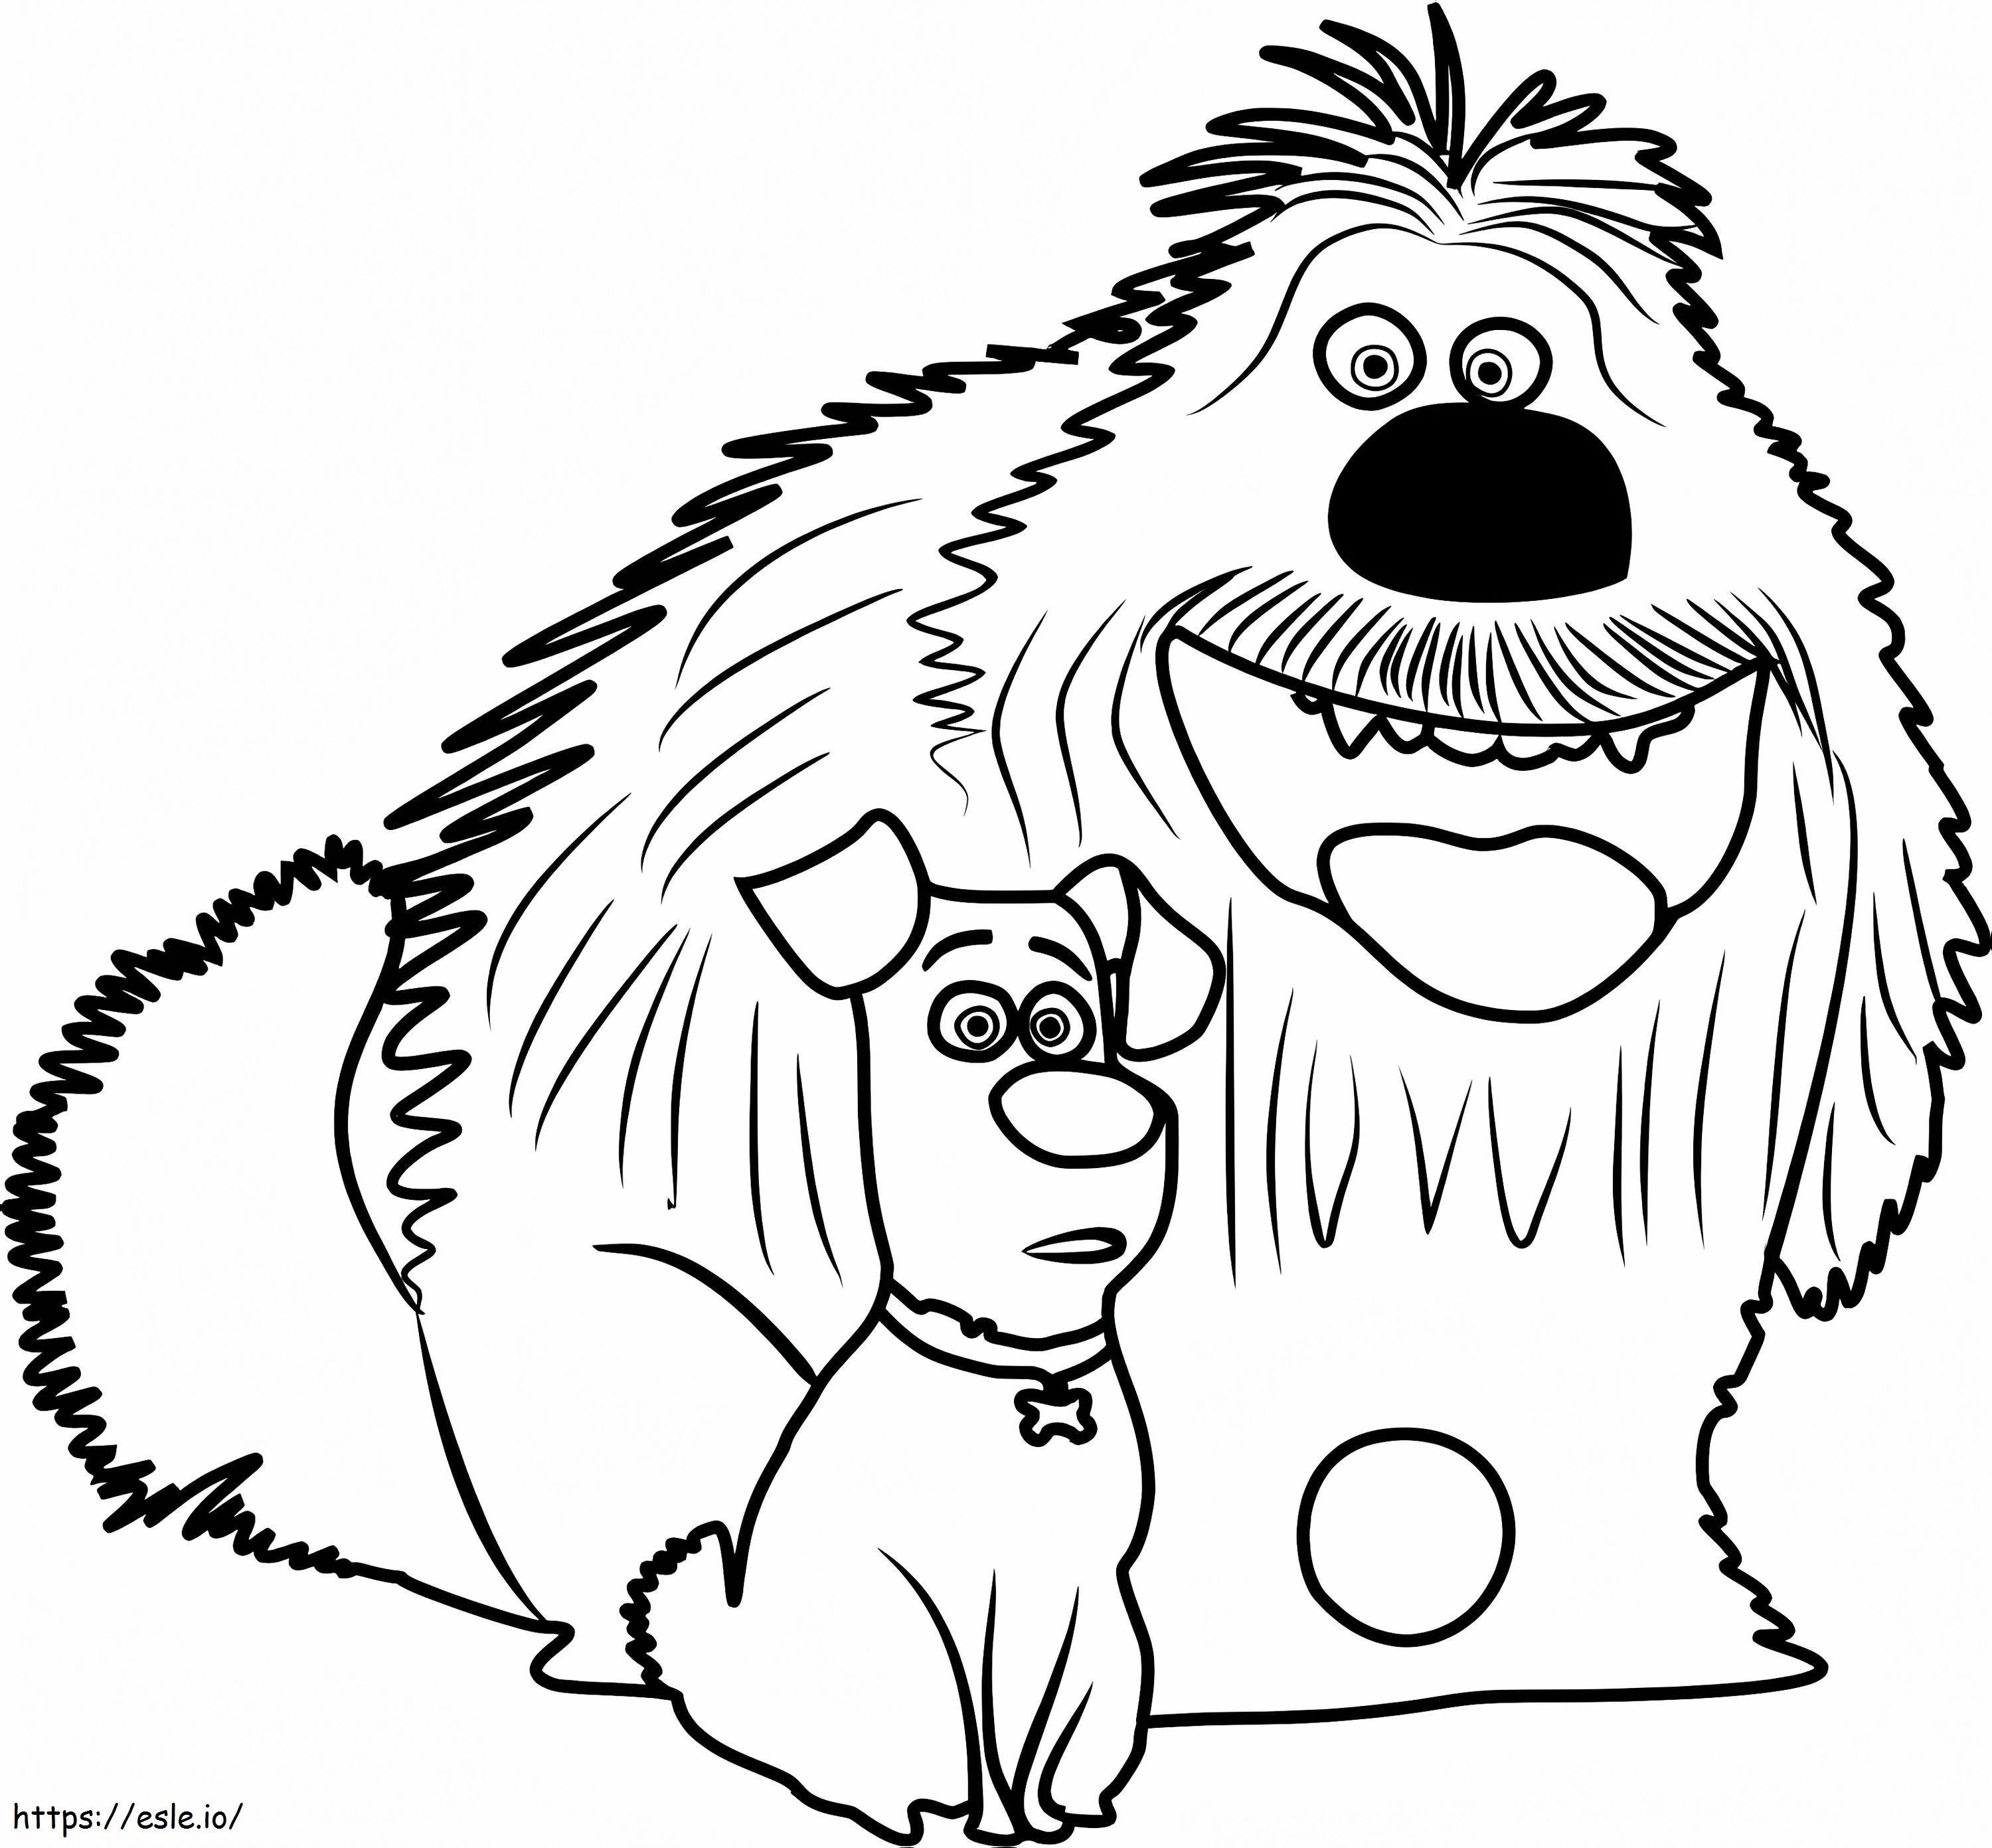 Duke And Max Sitting coloring page